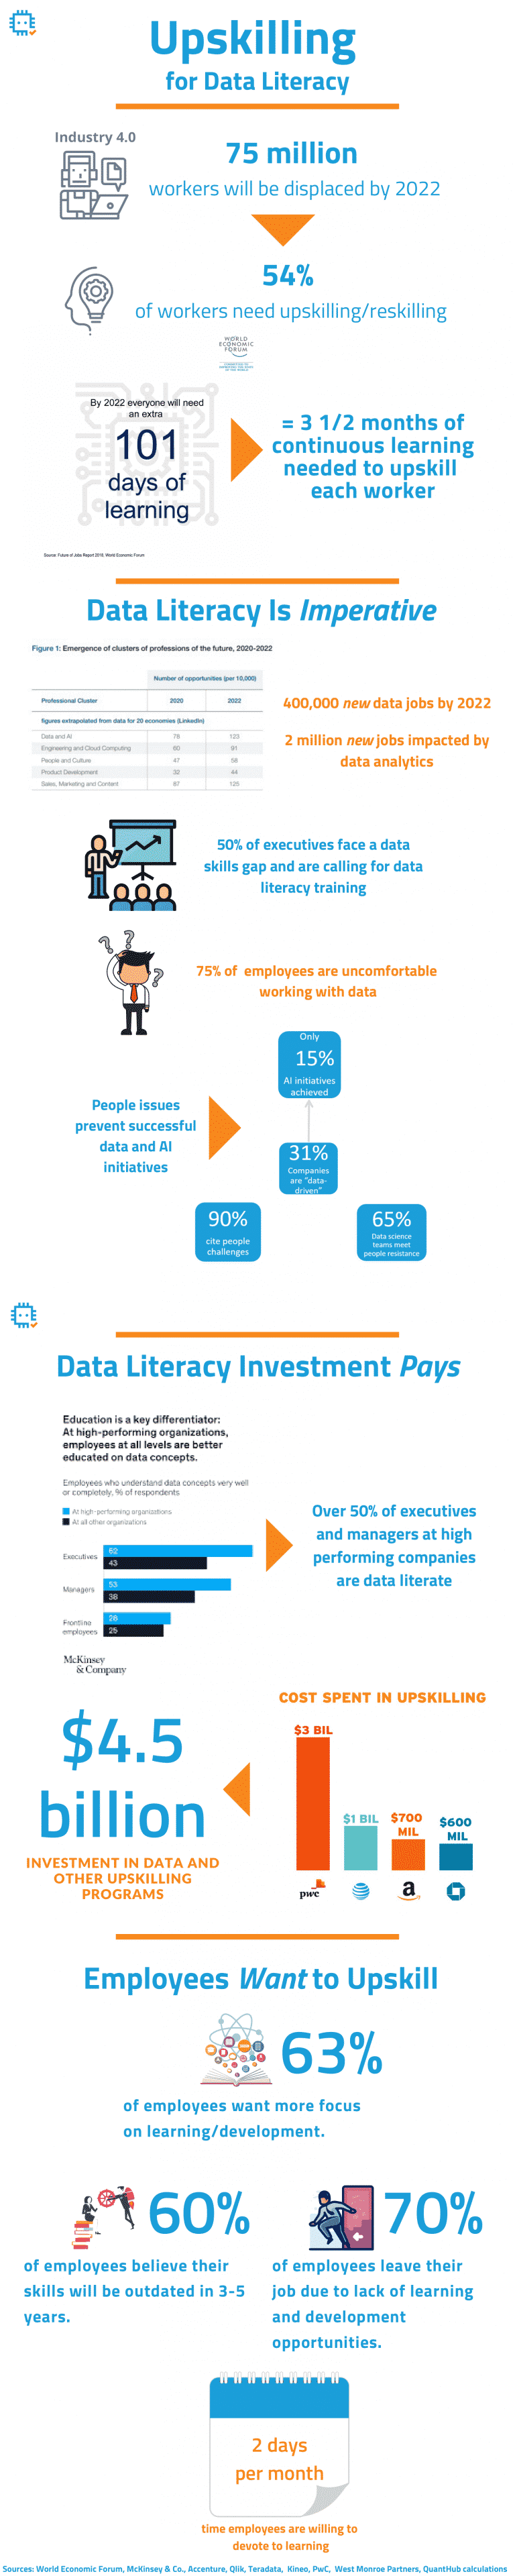 Upskilling for data literacy infographic